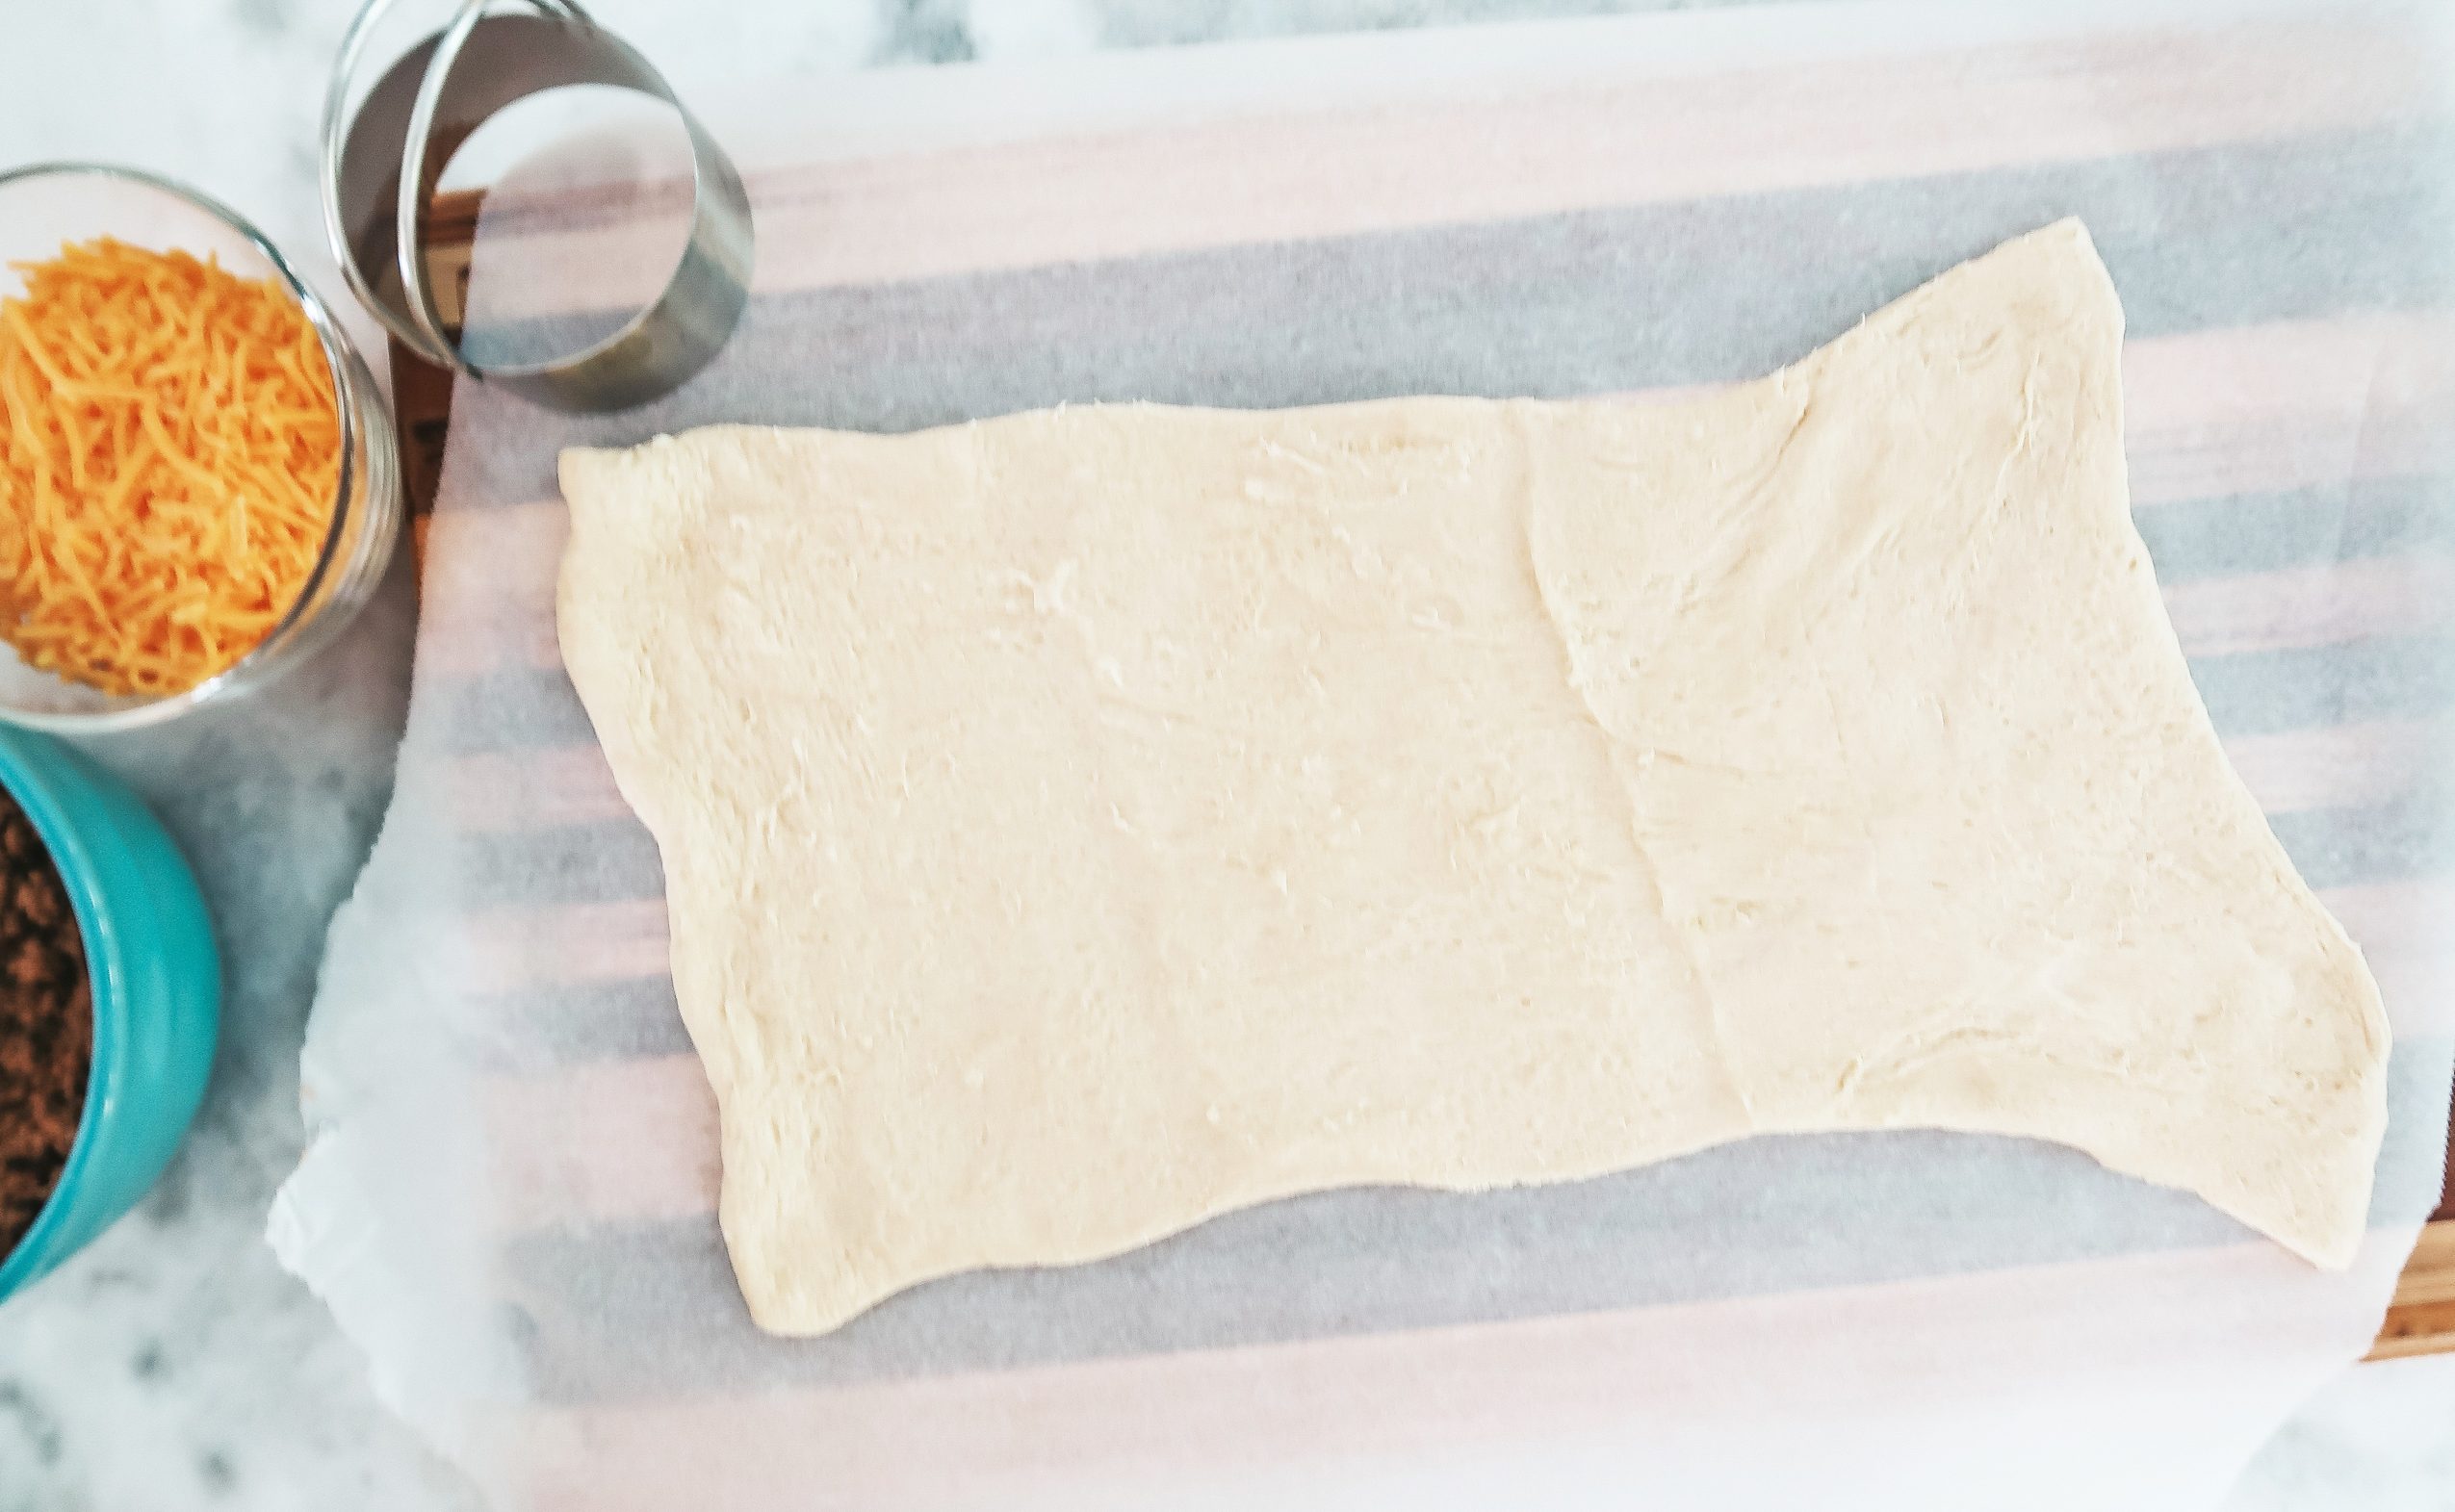 rolling out the crescent roll dough sheet